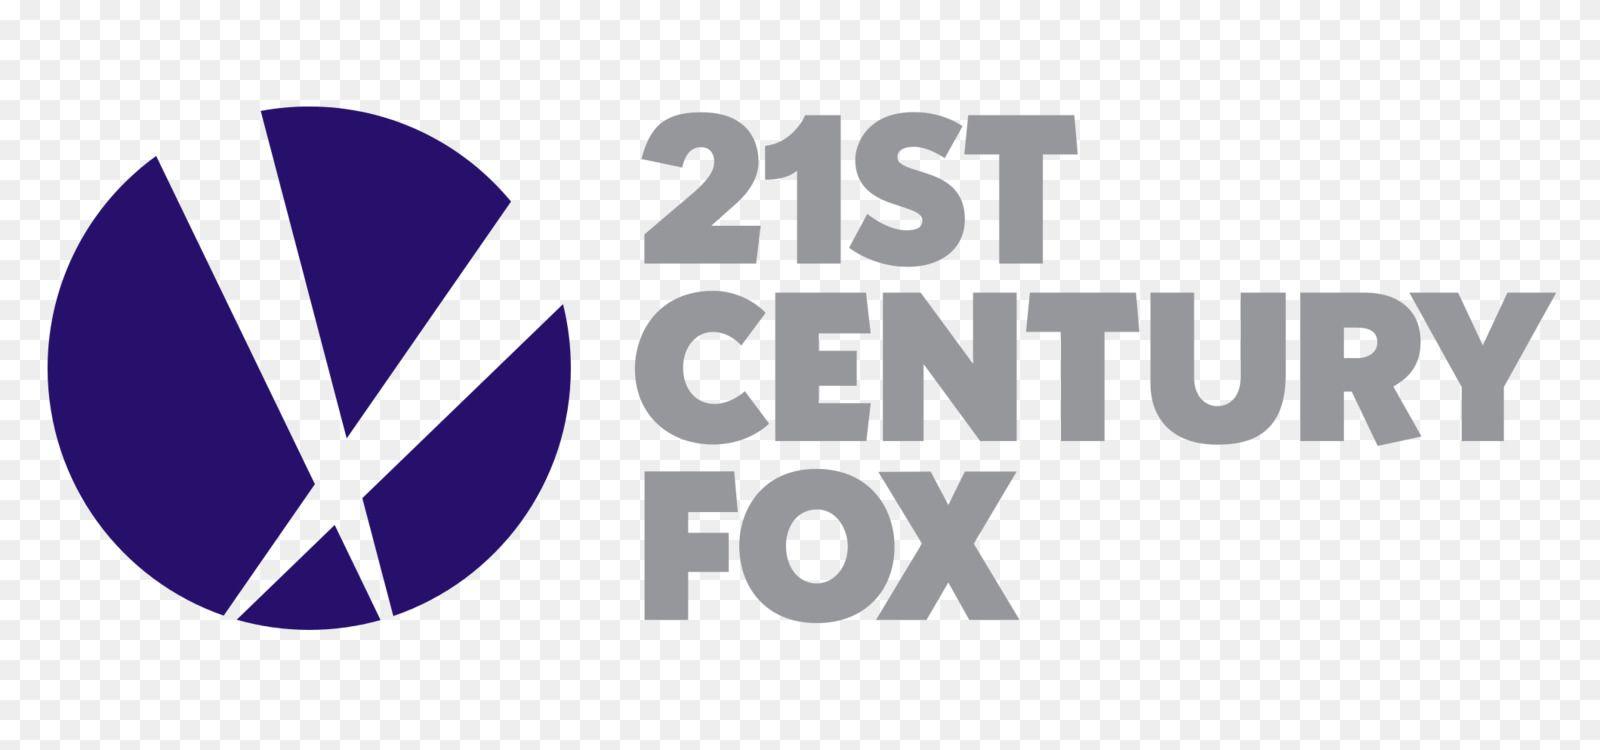 Acquisition Logo - Proposed acquisition of 21st Century Fox by Disney Fox Networks ...